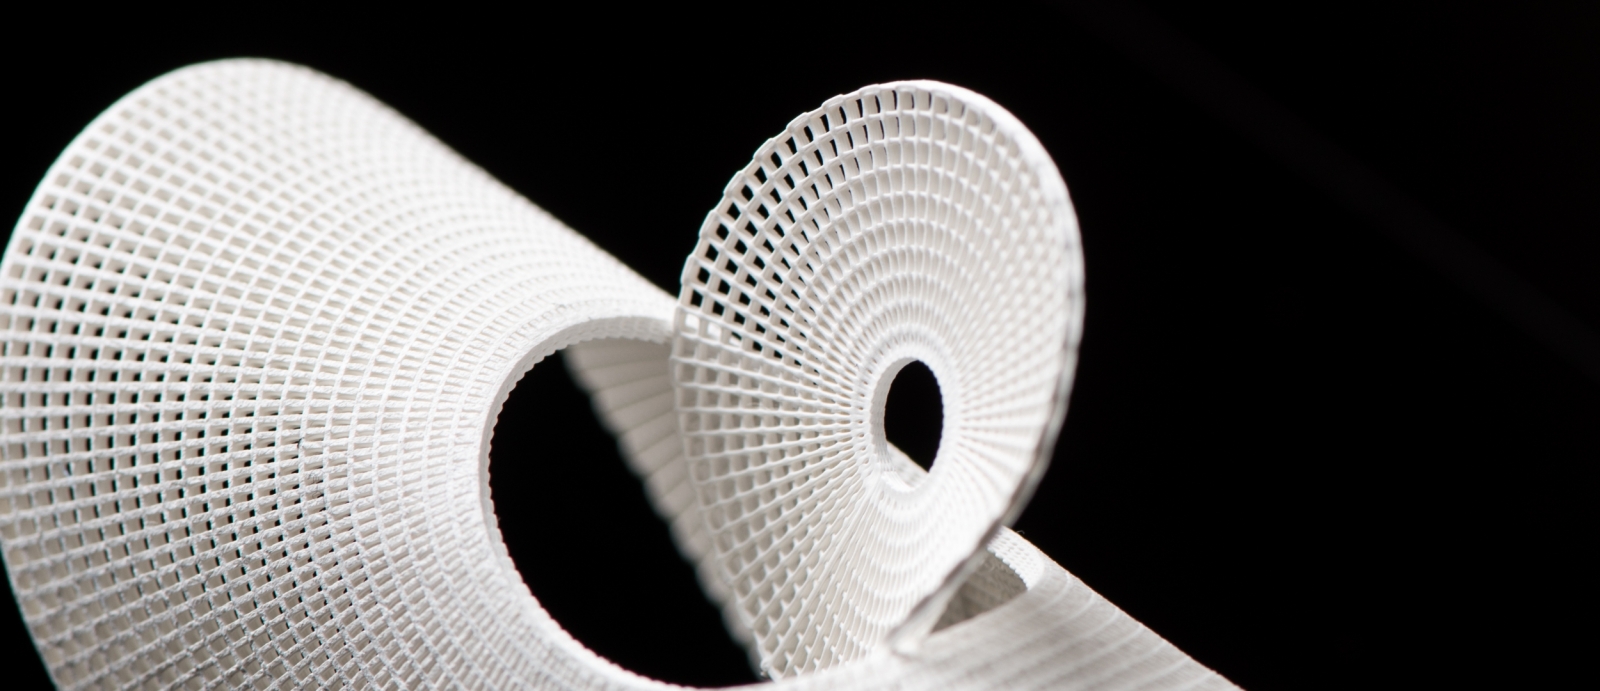 a 3D printed circular structure made of triblock copolymer composite inks. 